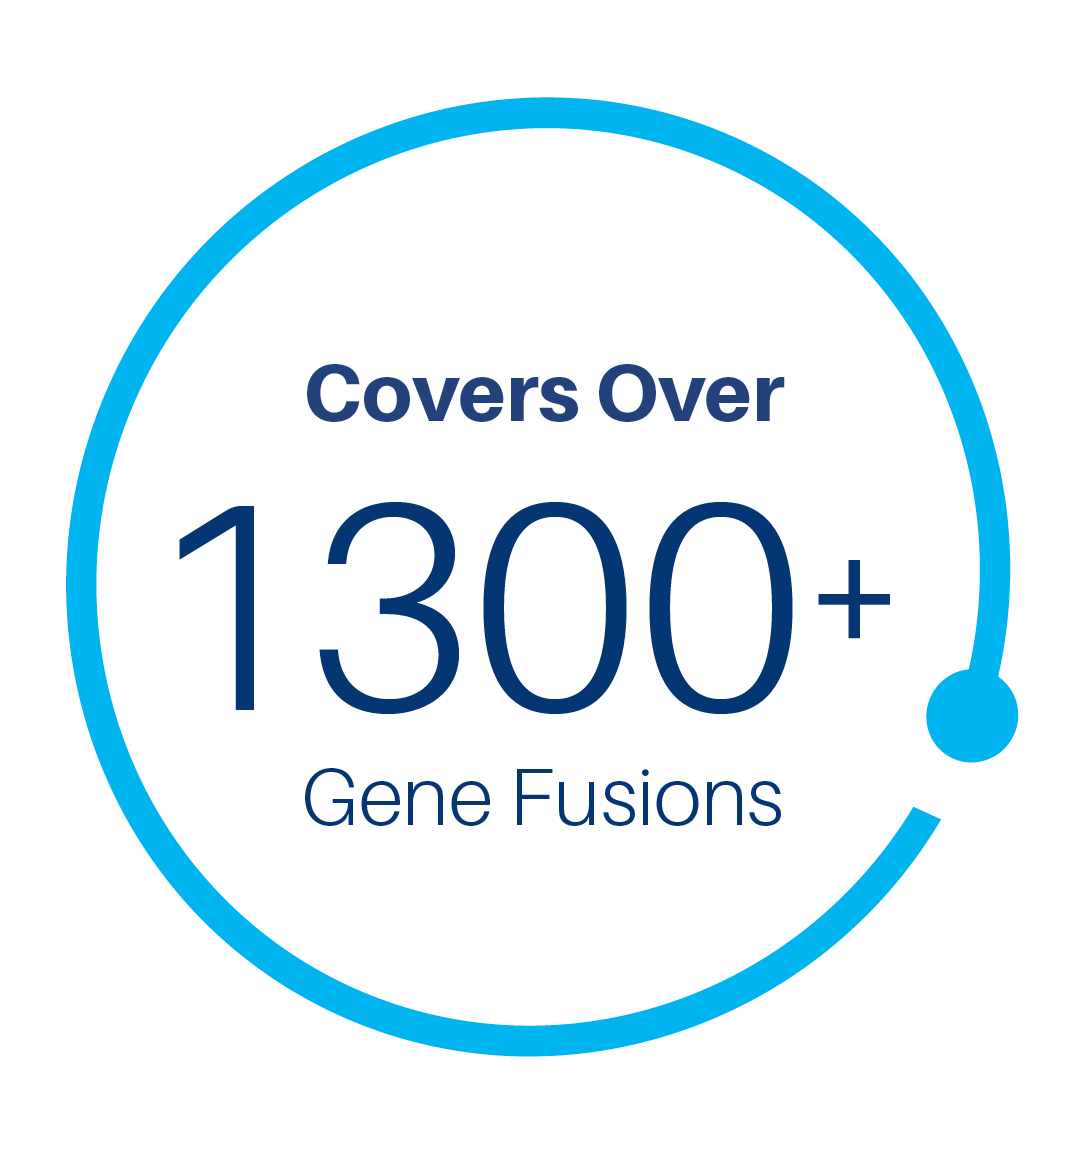 Covers over 1300+ gene fusions